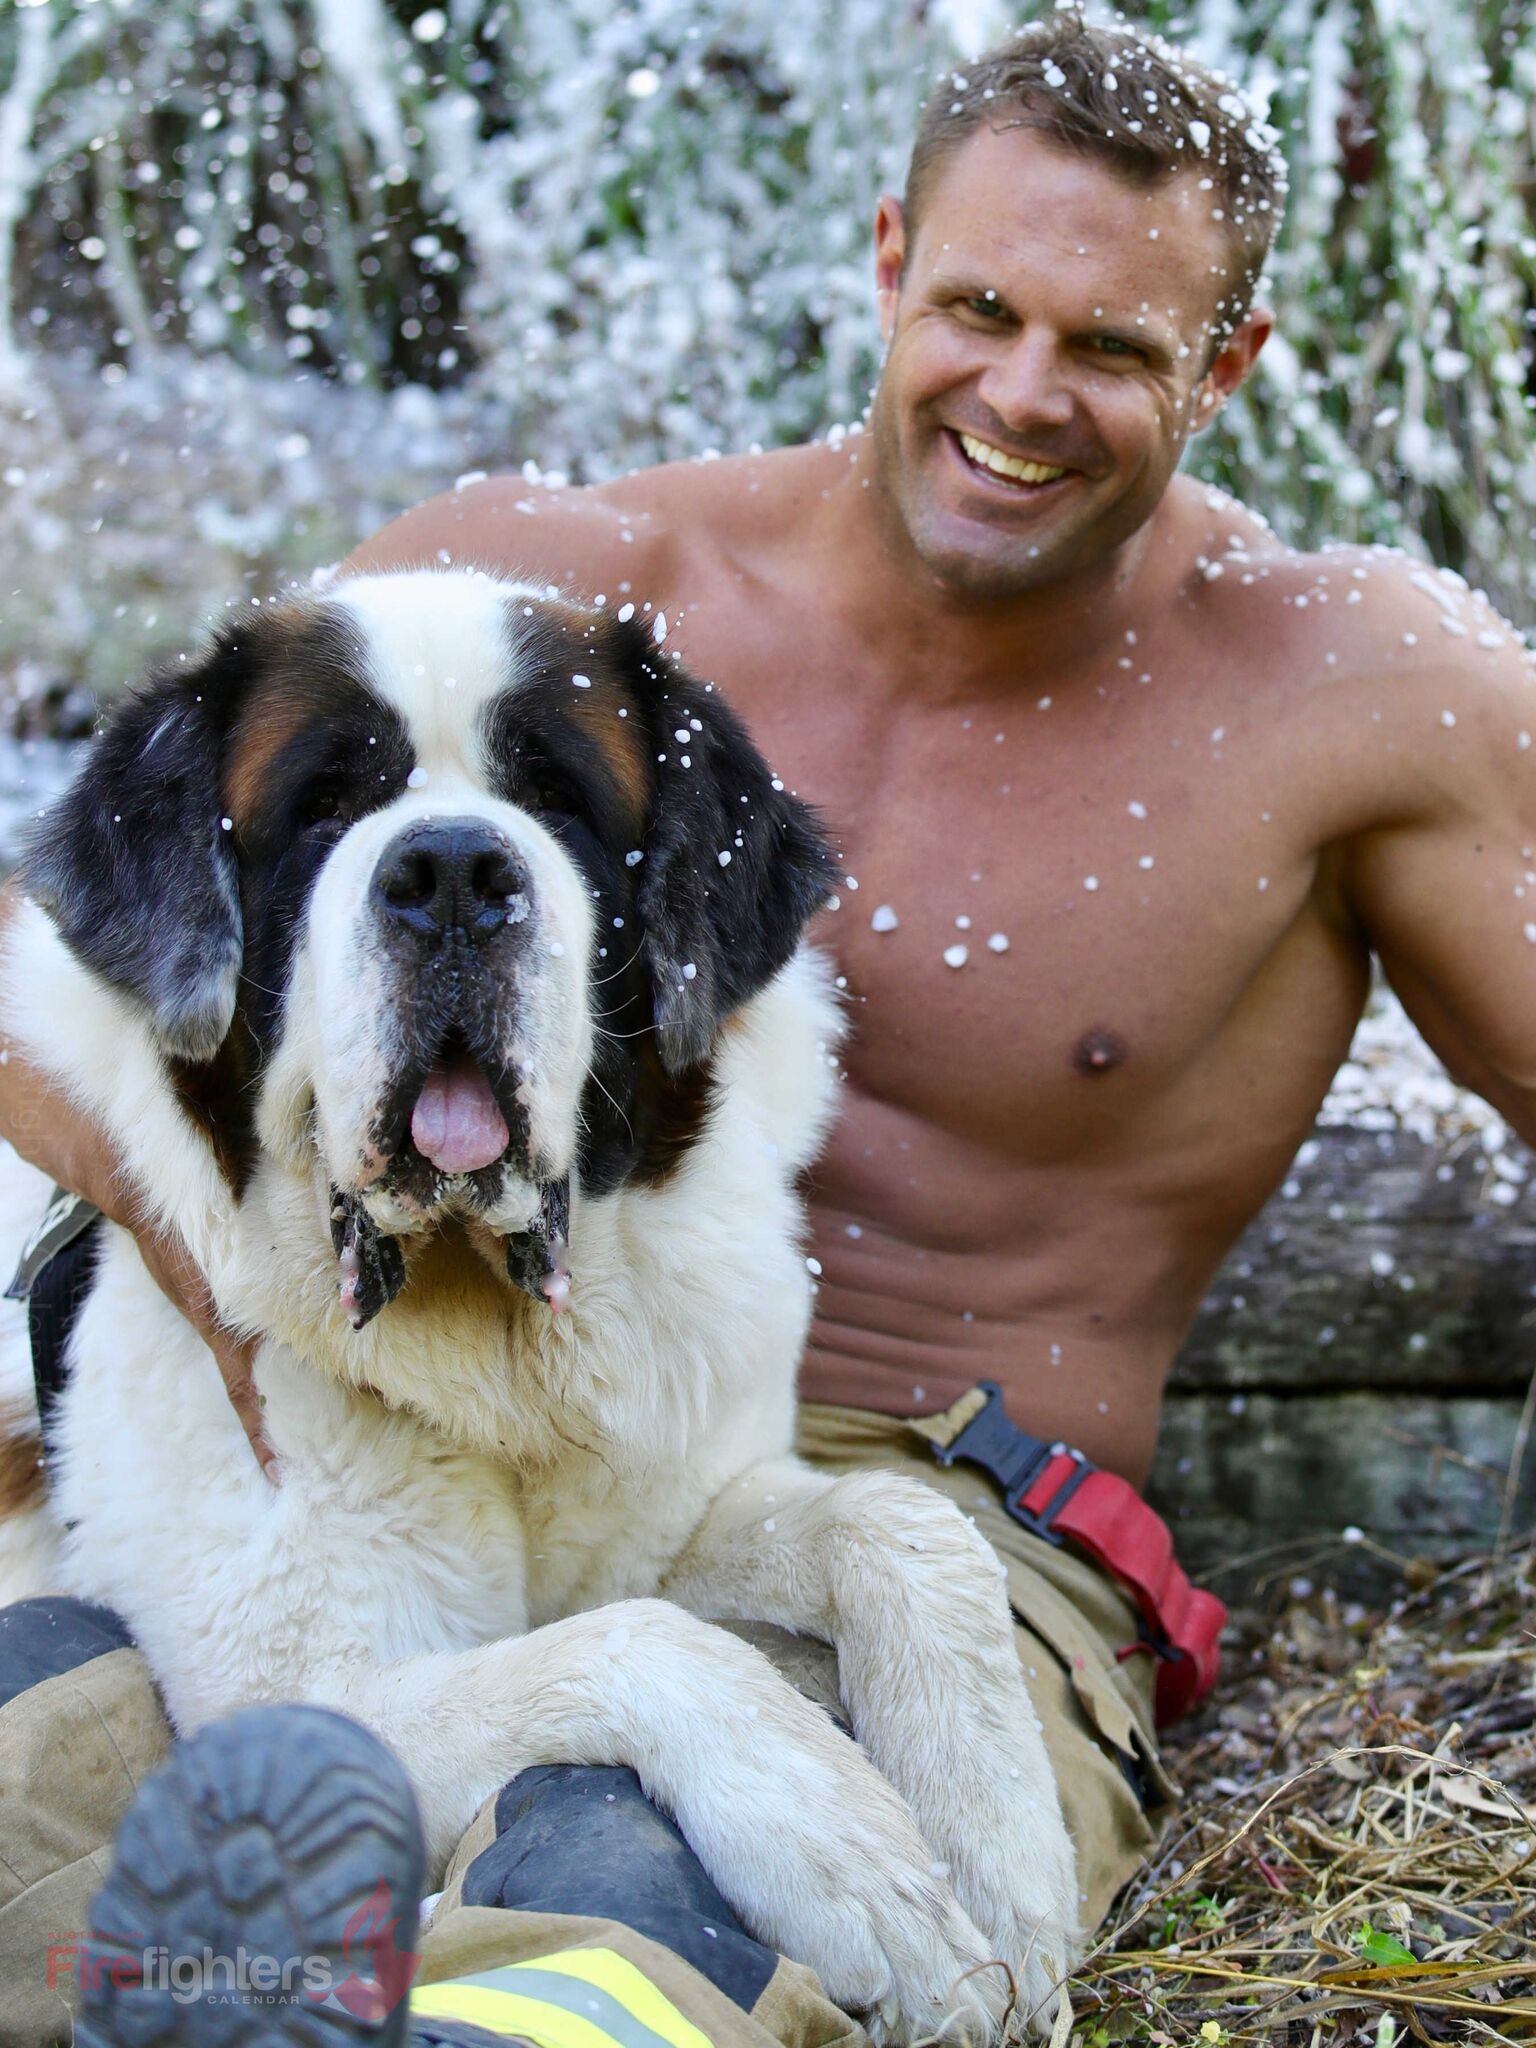 Hot Aussie Firefighters Posing with Animals for Charity Is the Sexiest Cale...